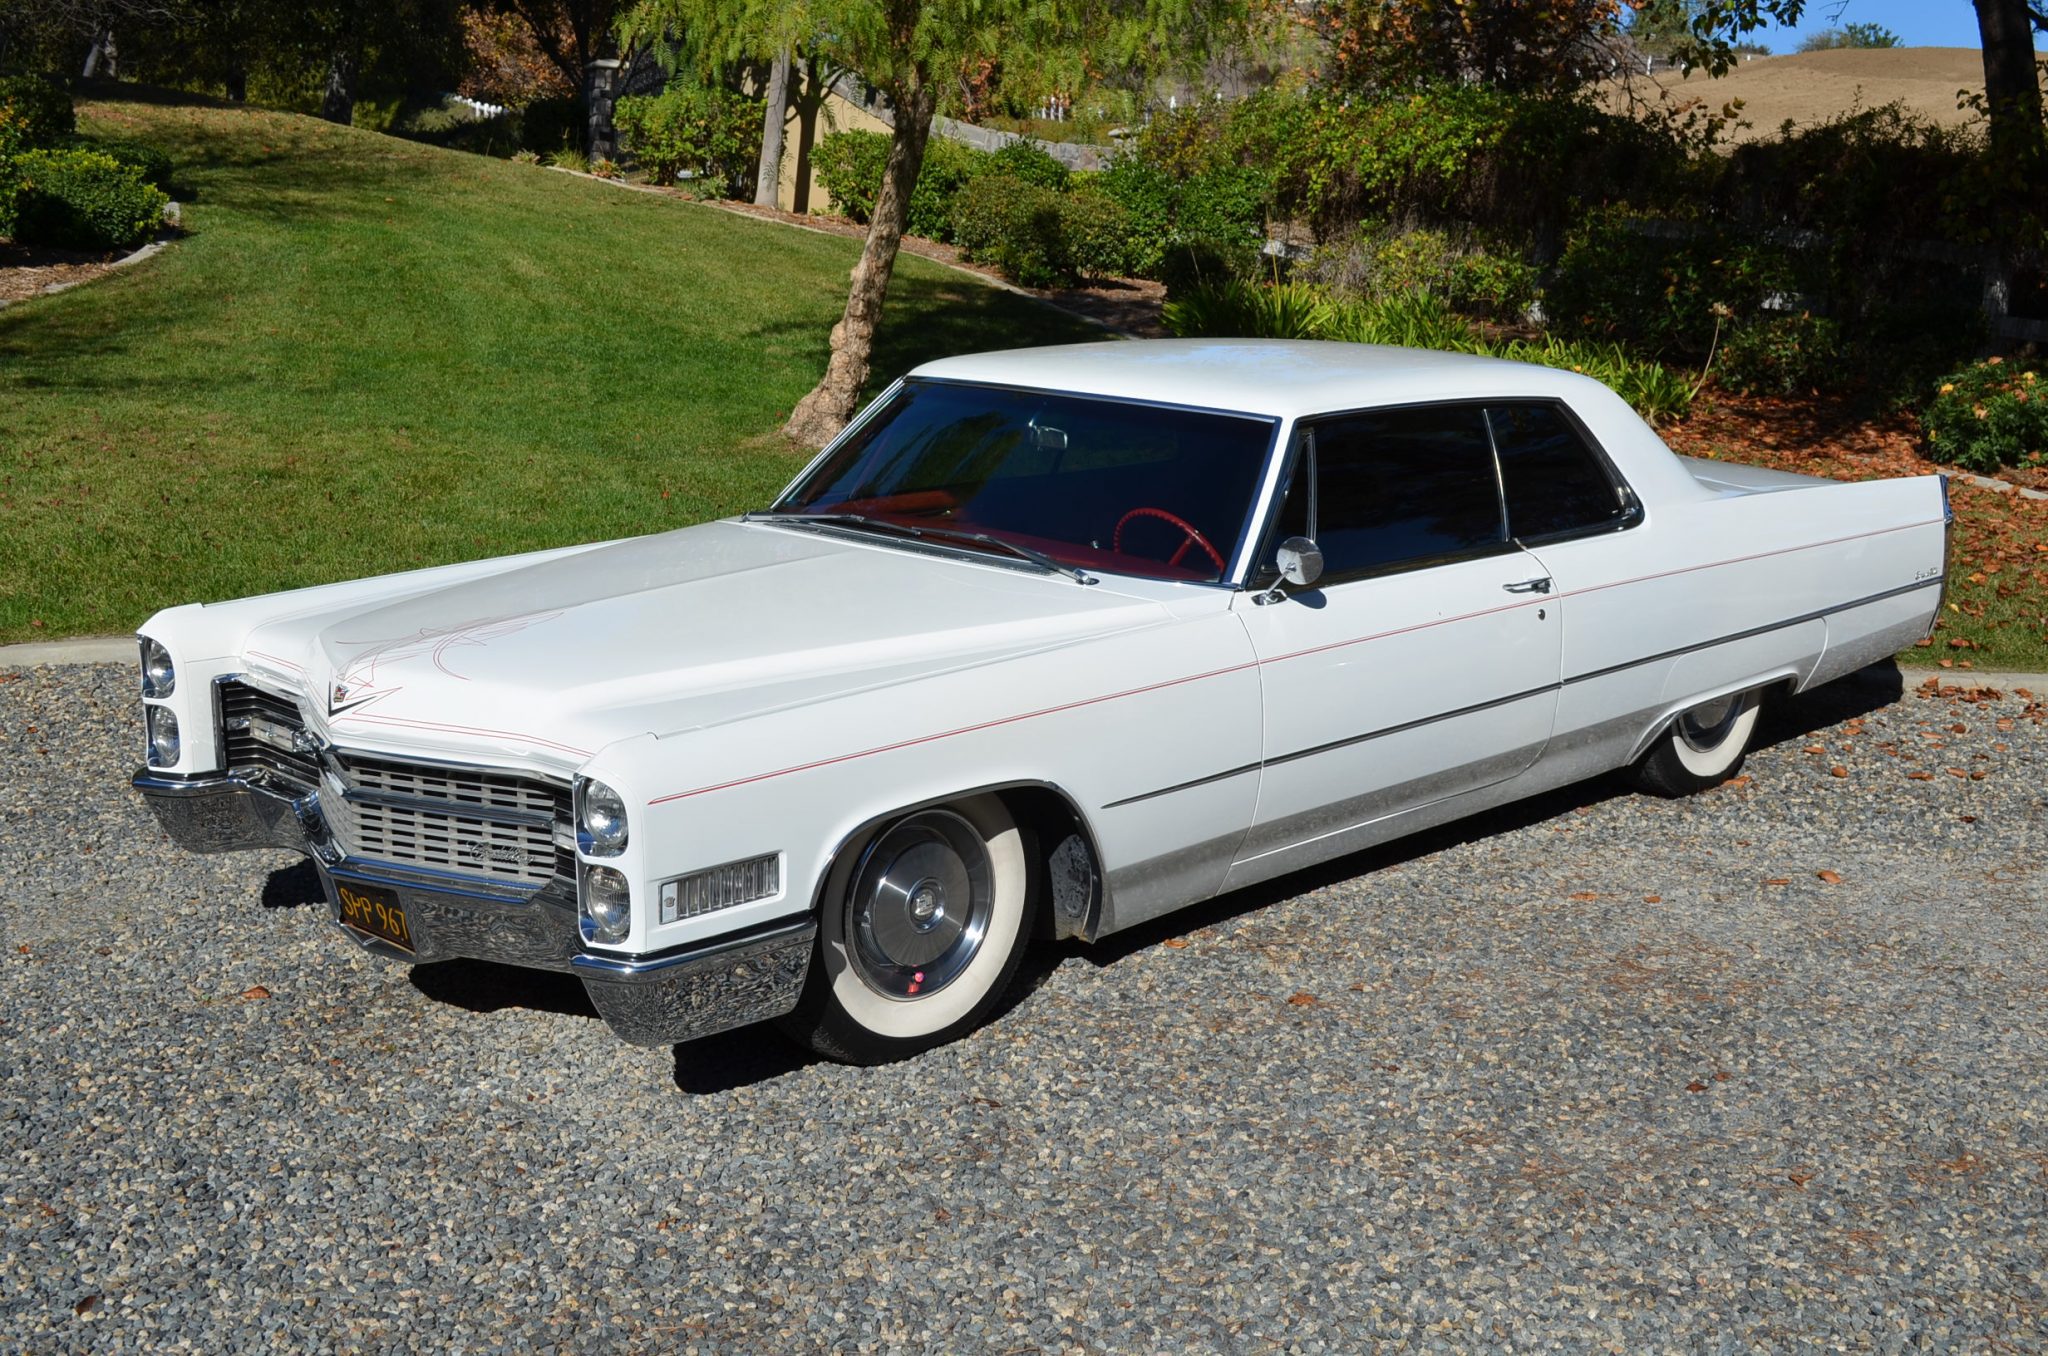 1966 Cadillac Coupe DeVille,"Black Plate", One Family 44 years